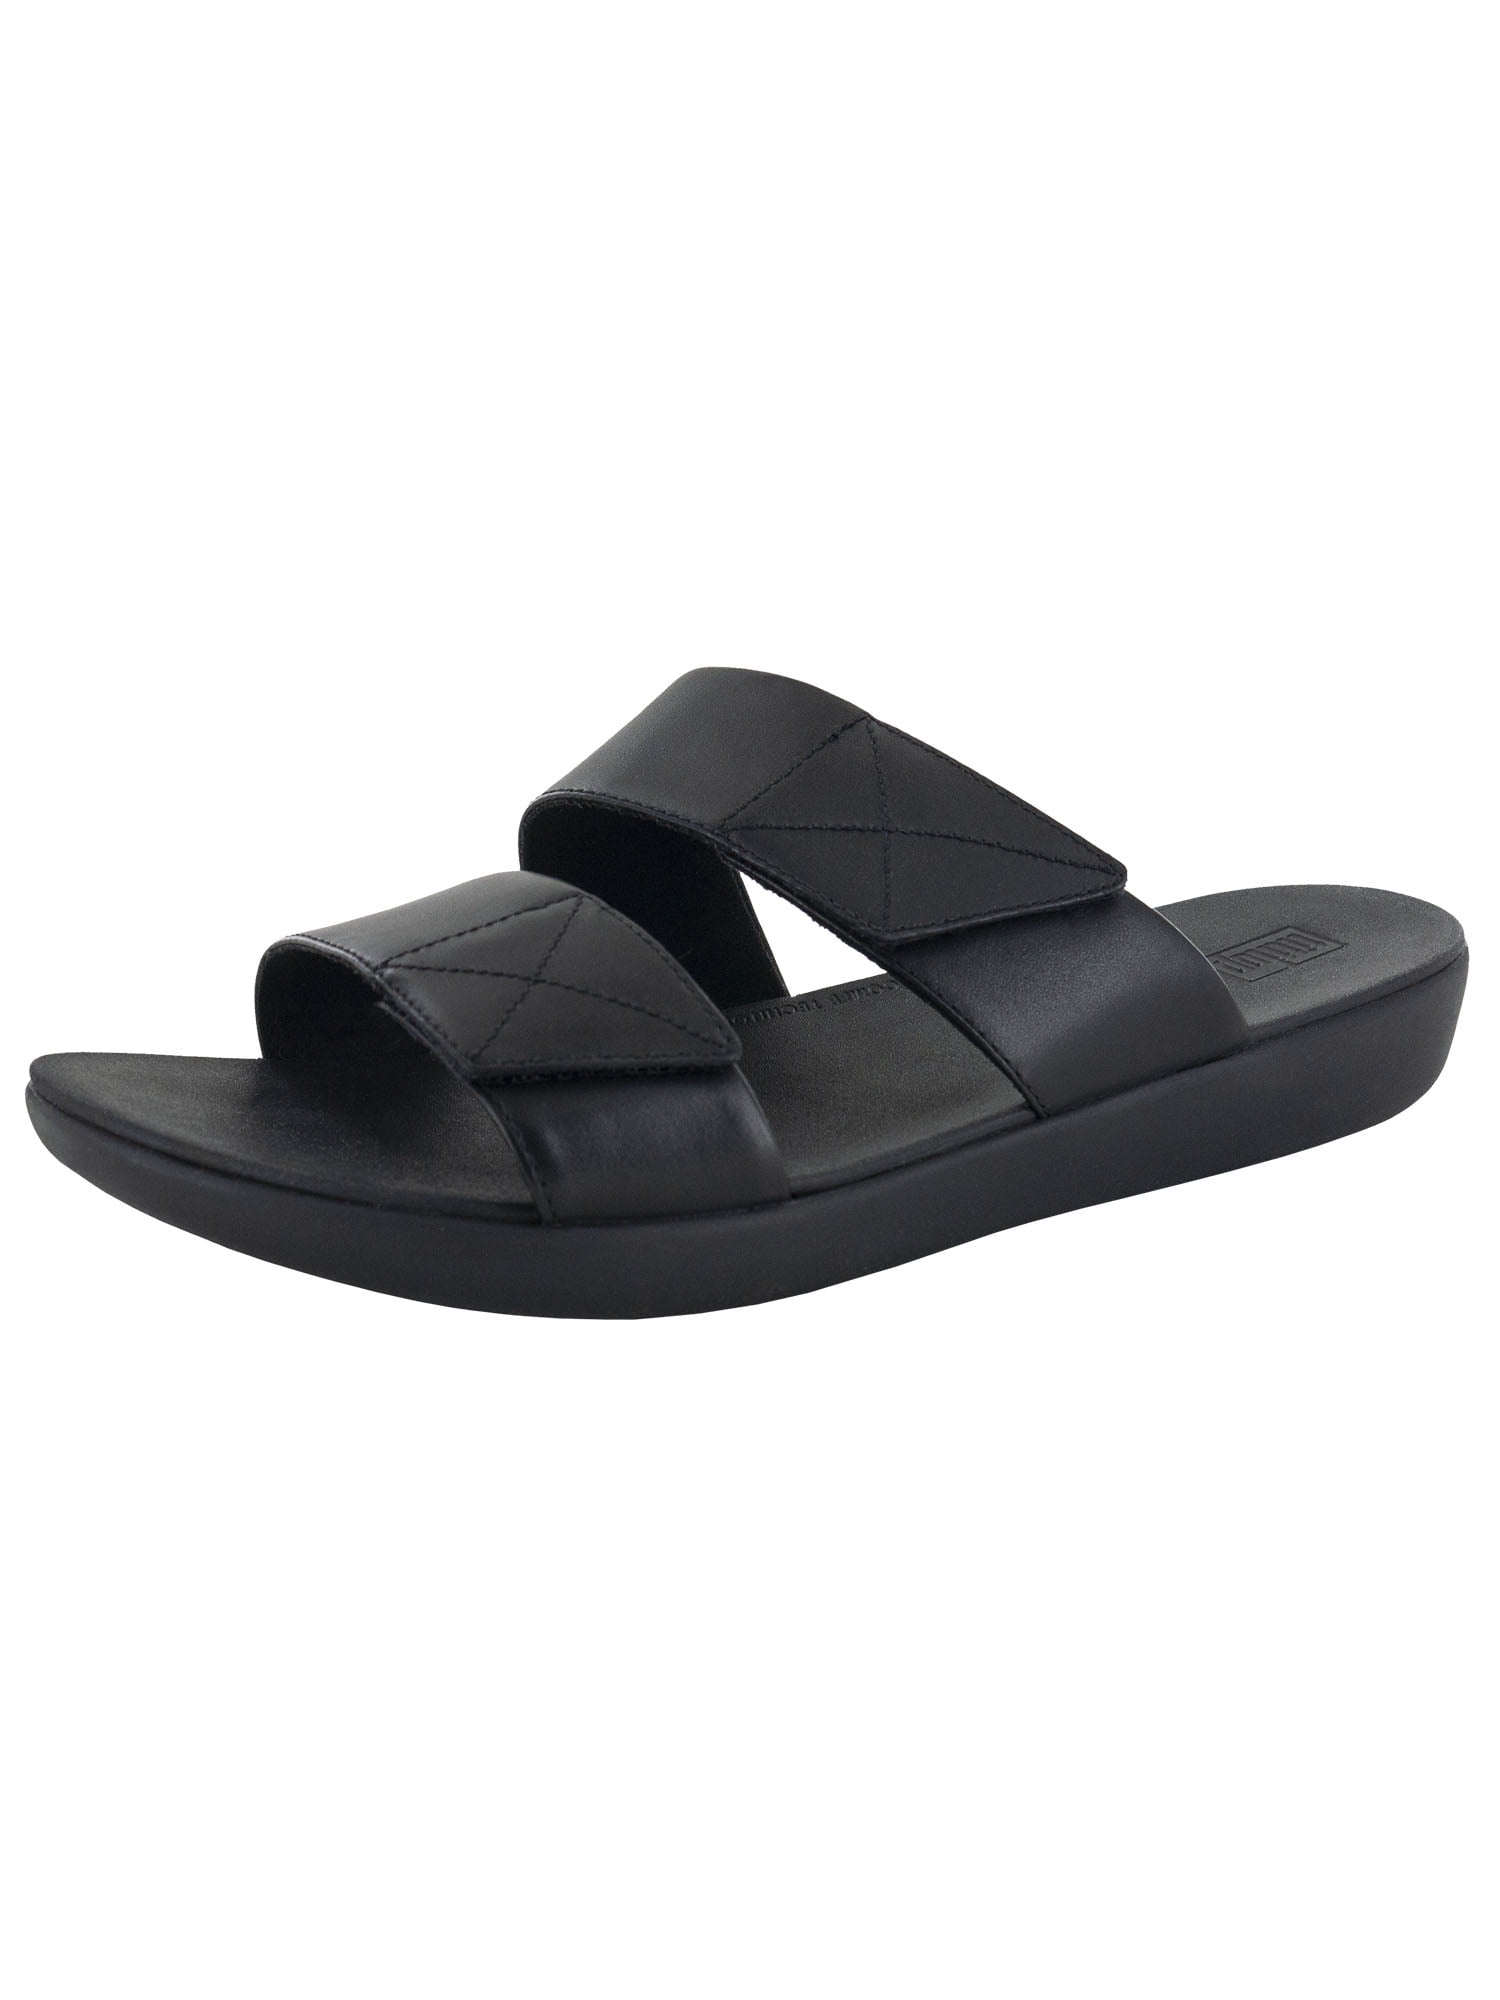 Fitflop Womens Carin Slide Leather 